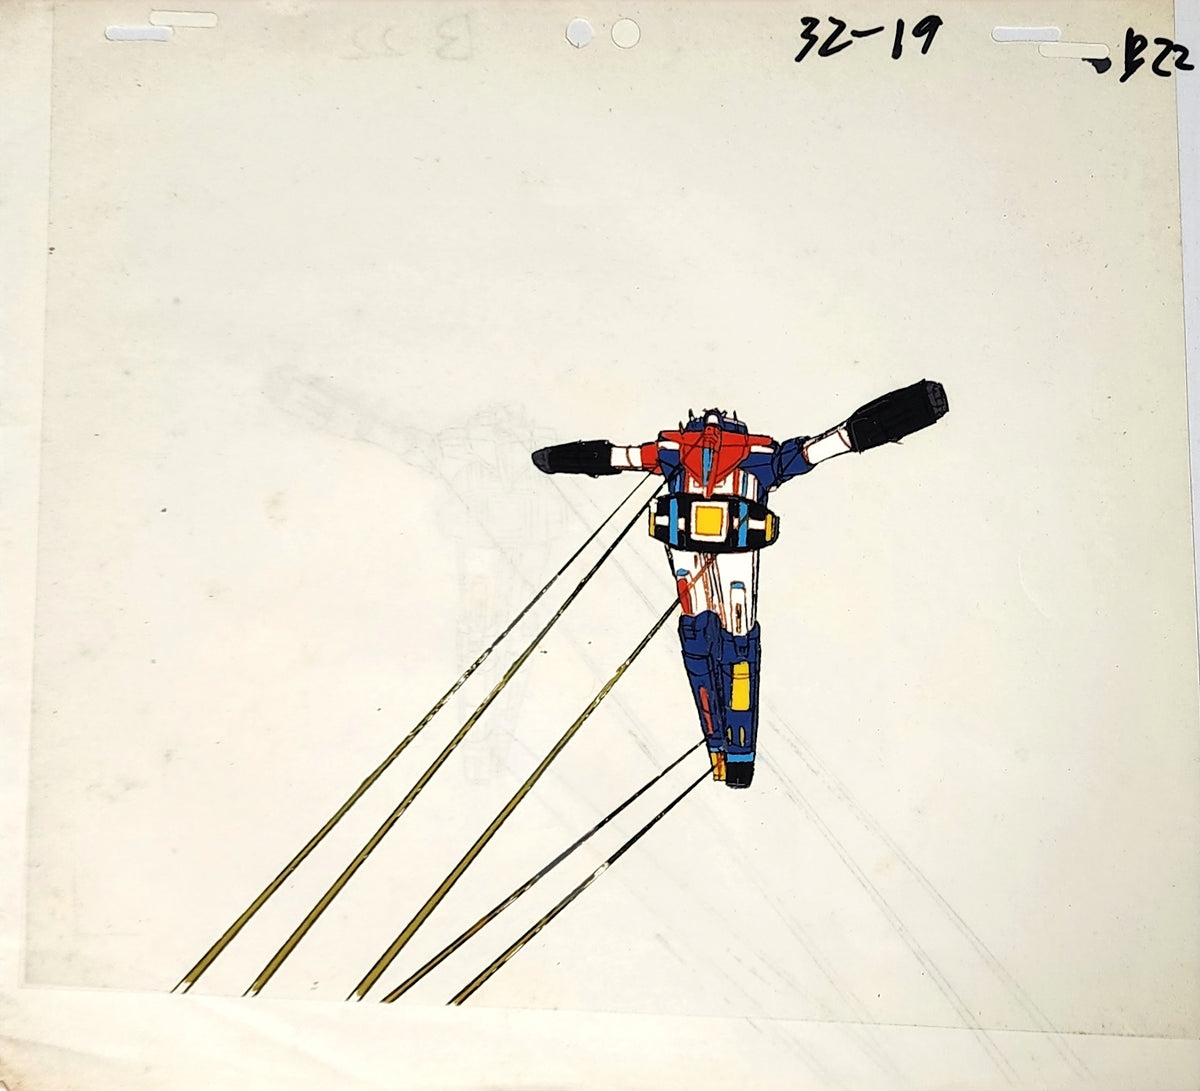 Voltron Vehicle Force Anime Animation Production Cel: 4396